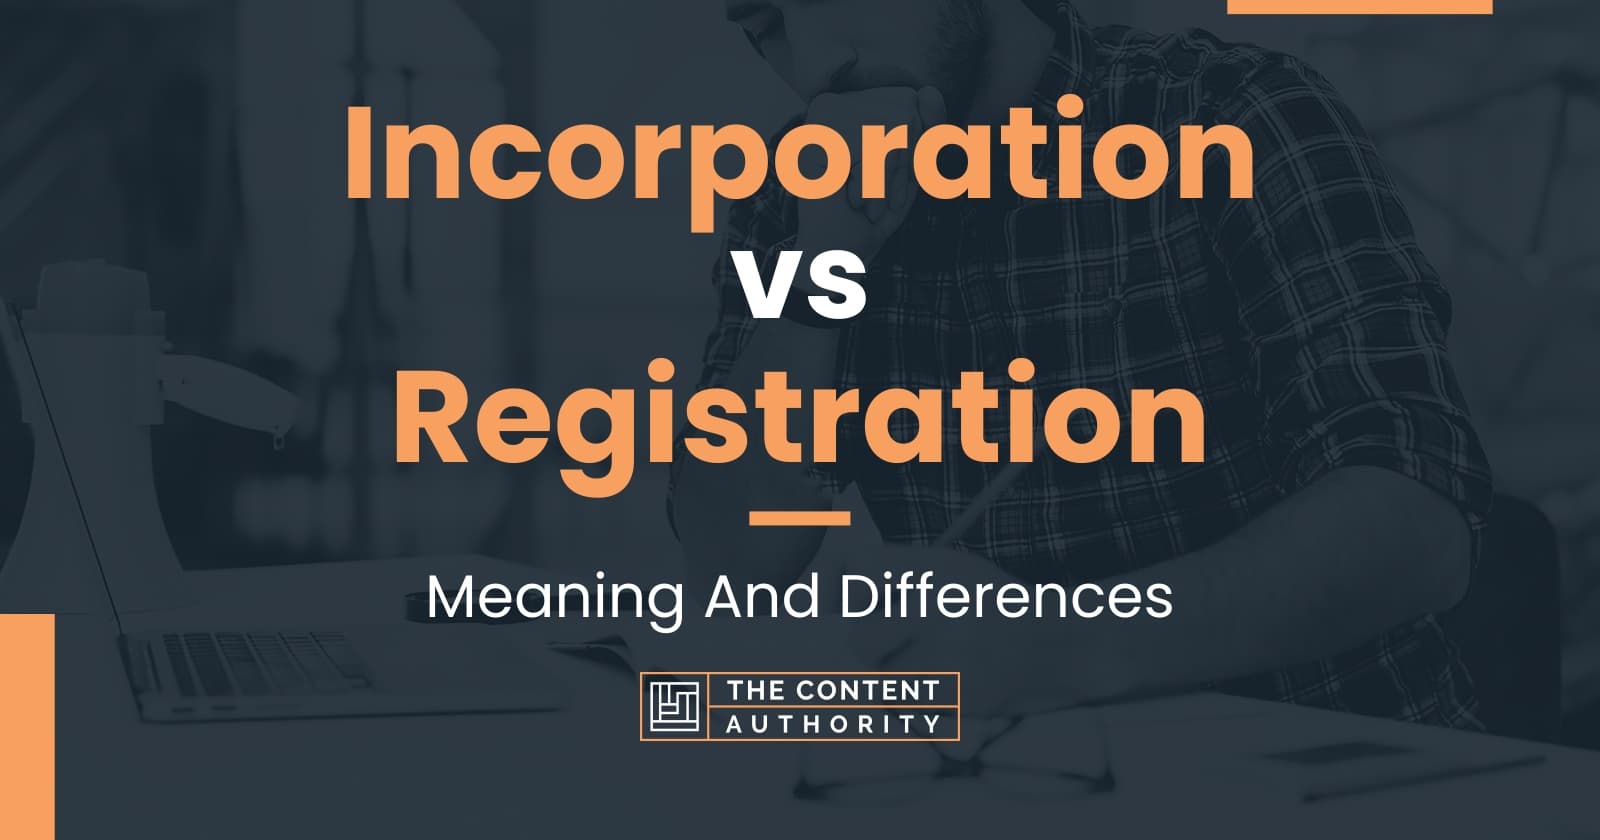 Incorporation vs Registration: Meaning And Differences